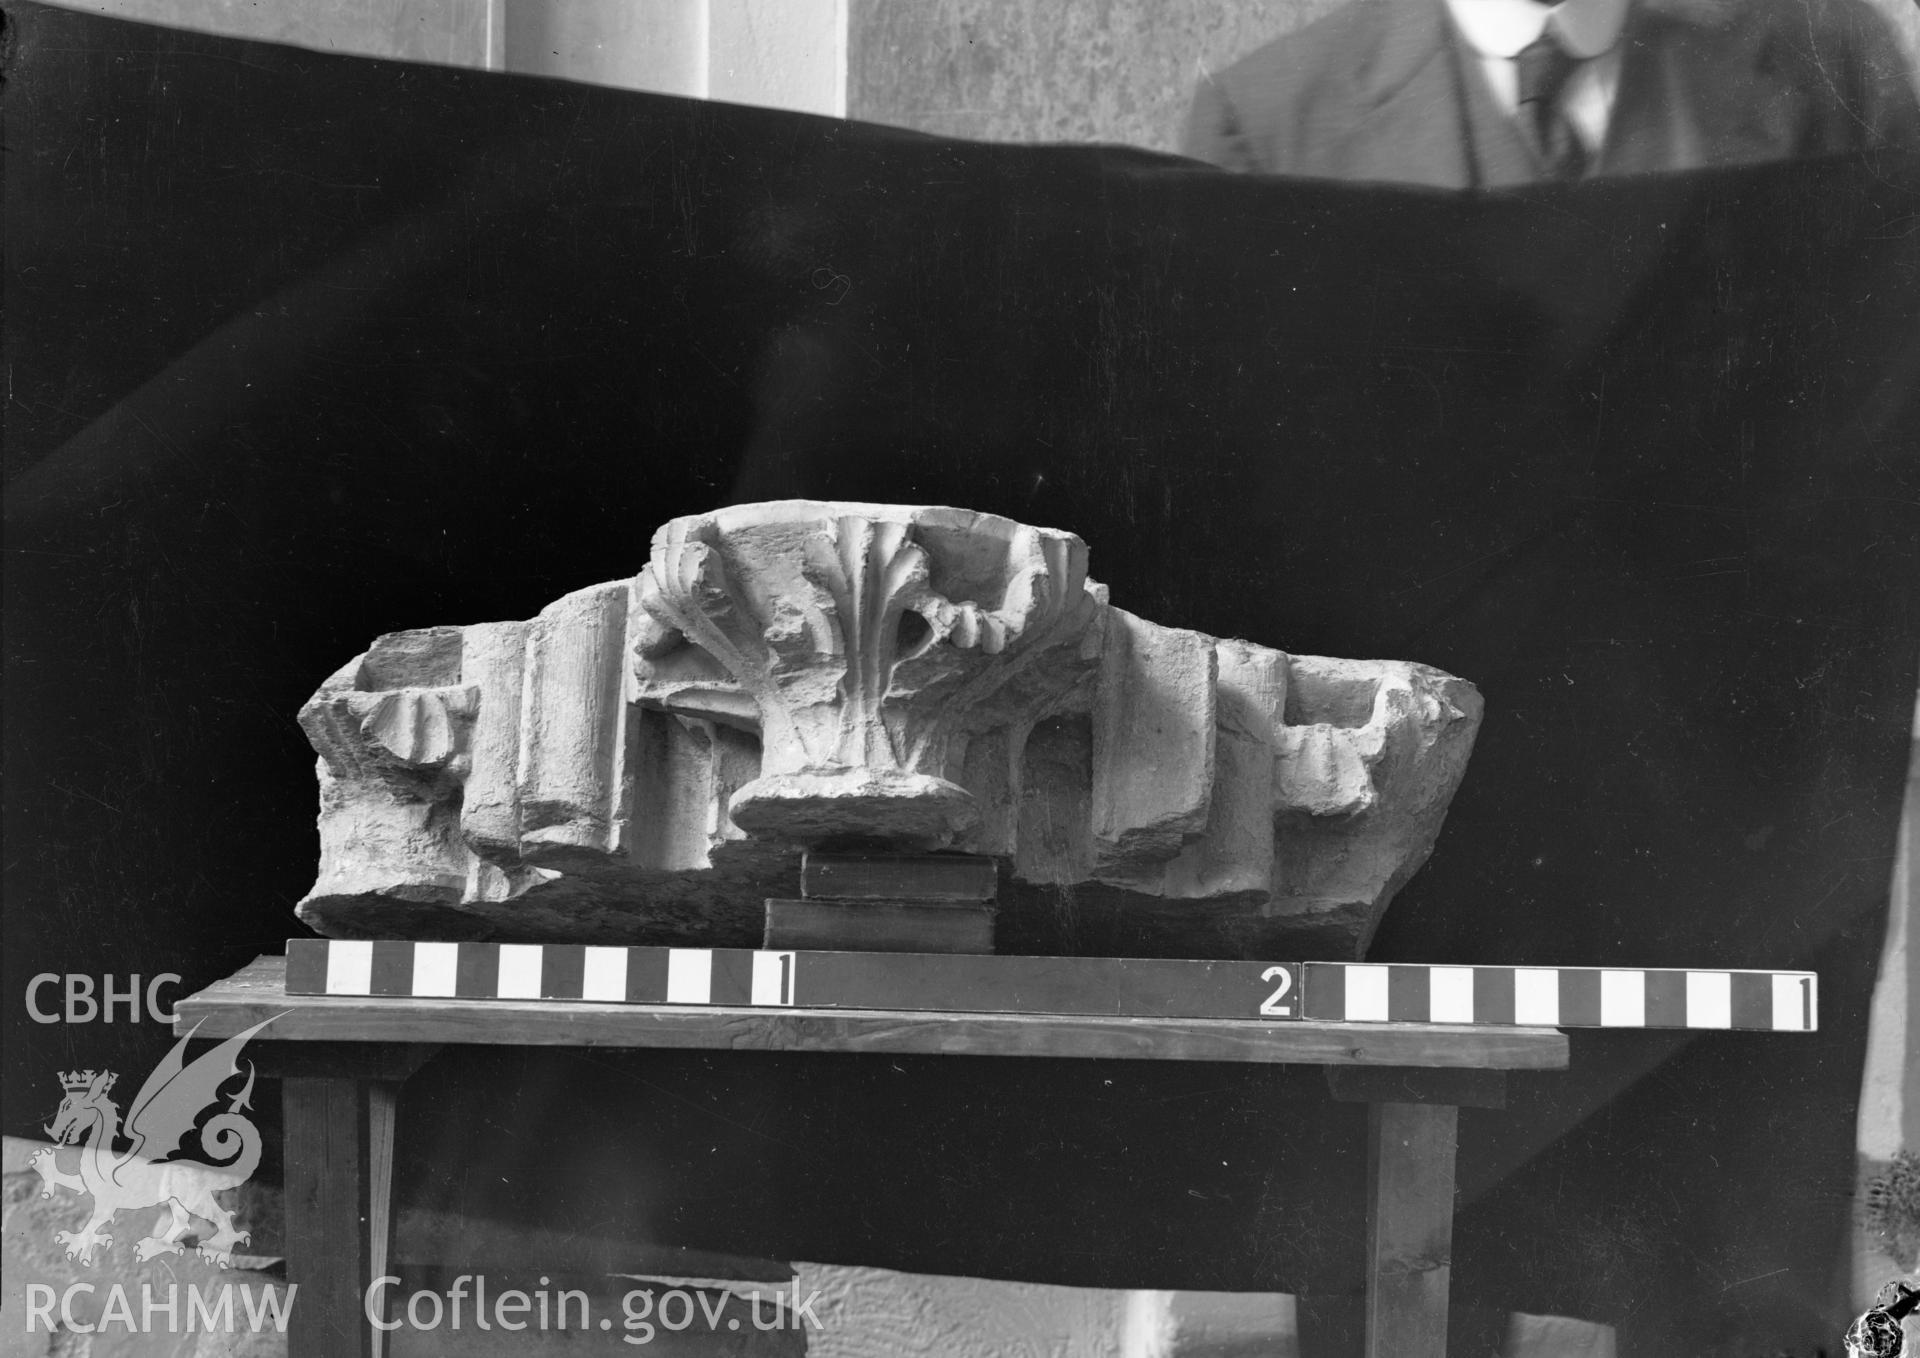 Digital copy of a black and white nitrate negative showing detail of capital section at St. David's Cathedral, taken by E.W. Lovegrove, July 1936.